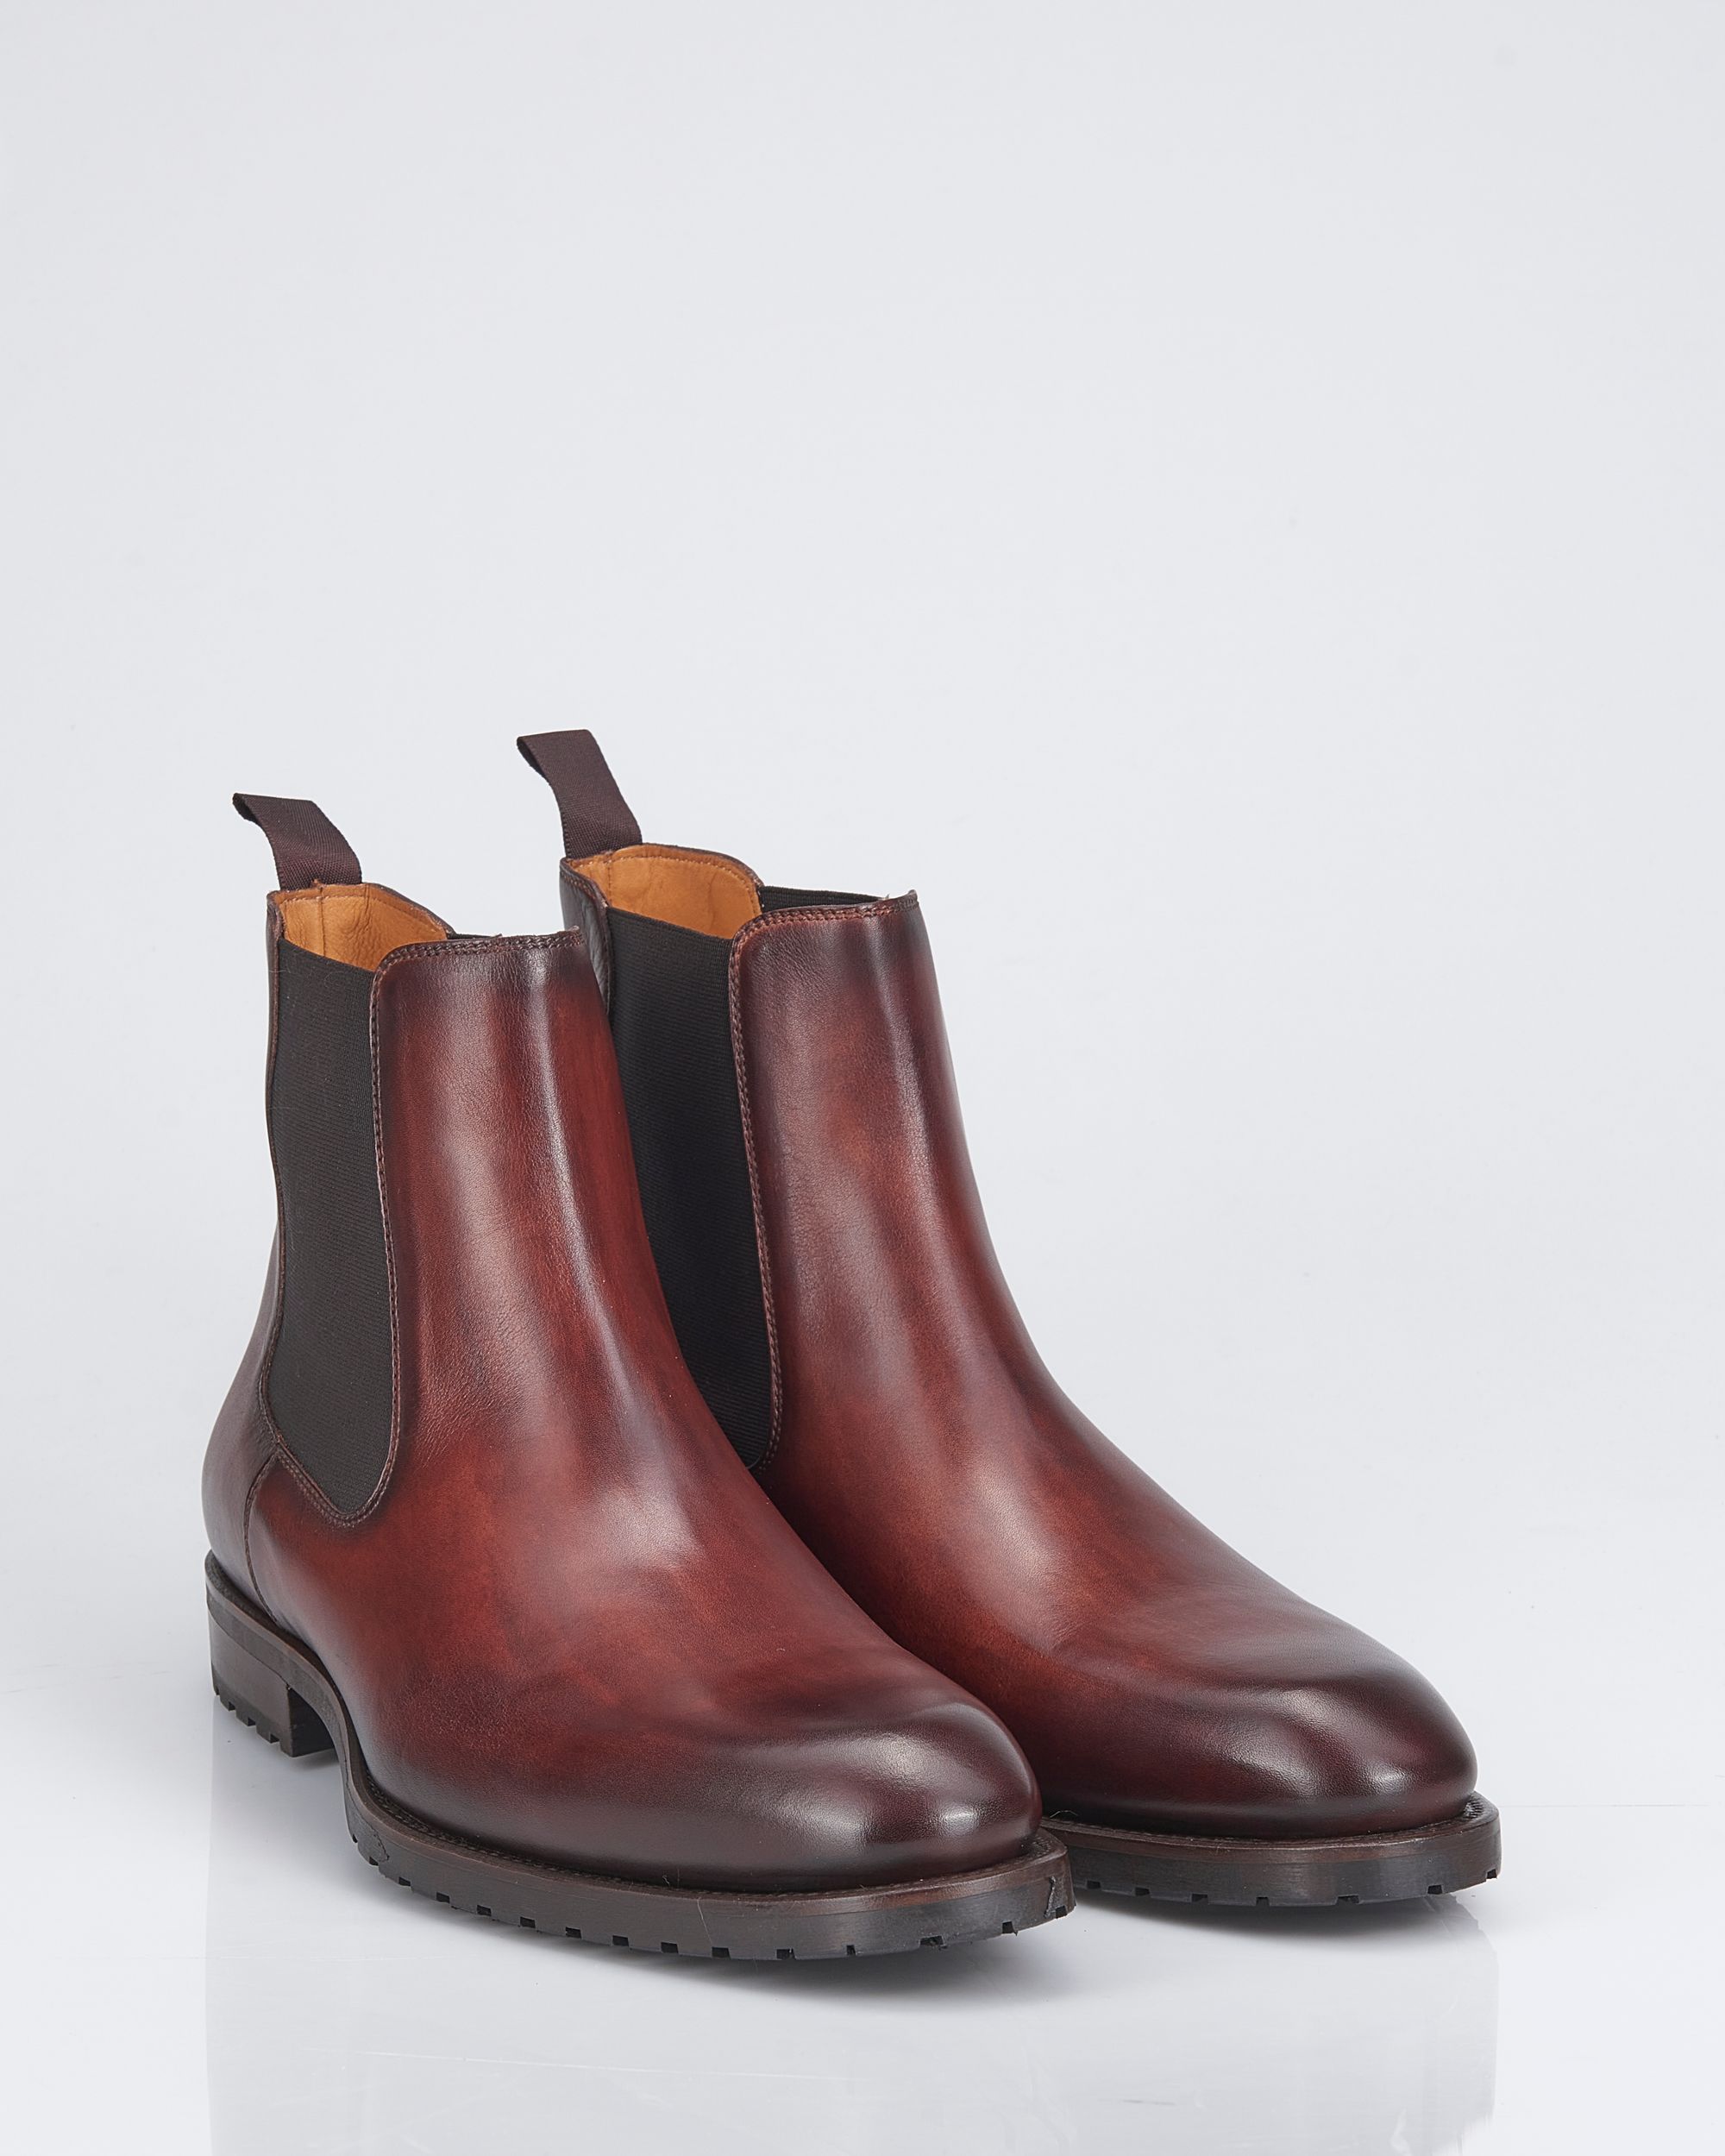 Magnanni Boots Donker bruin 086801-001-41